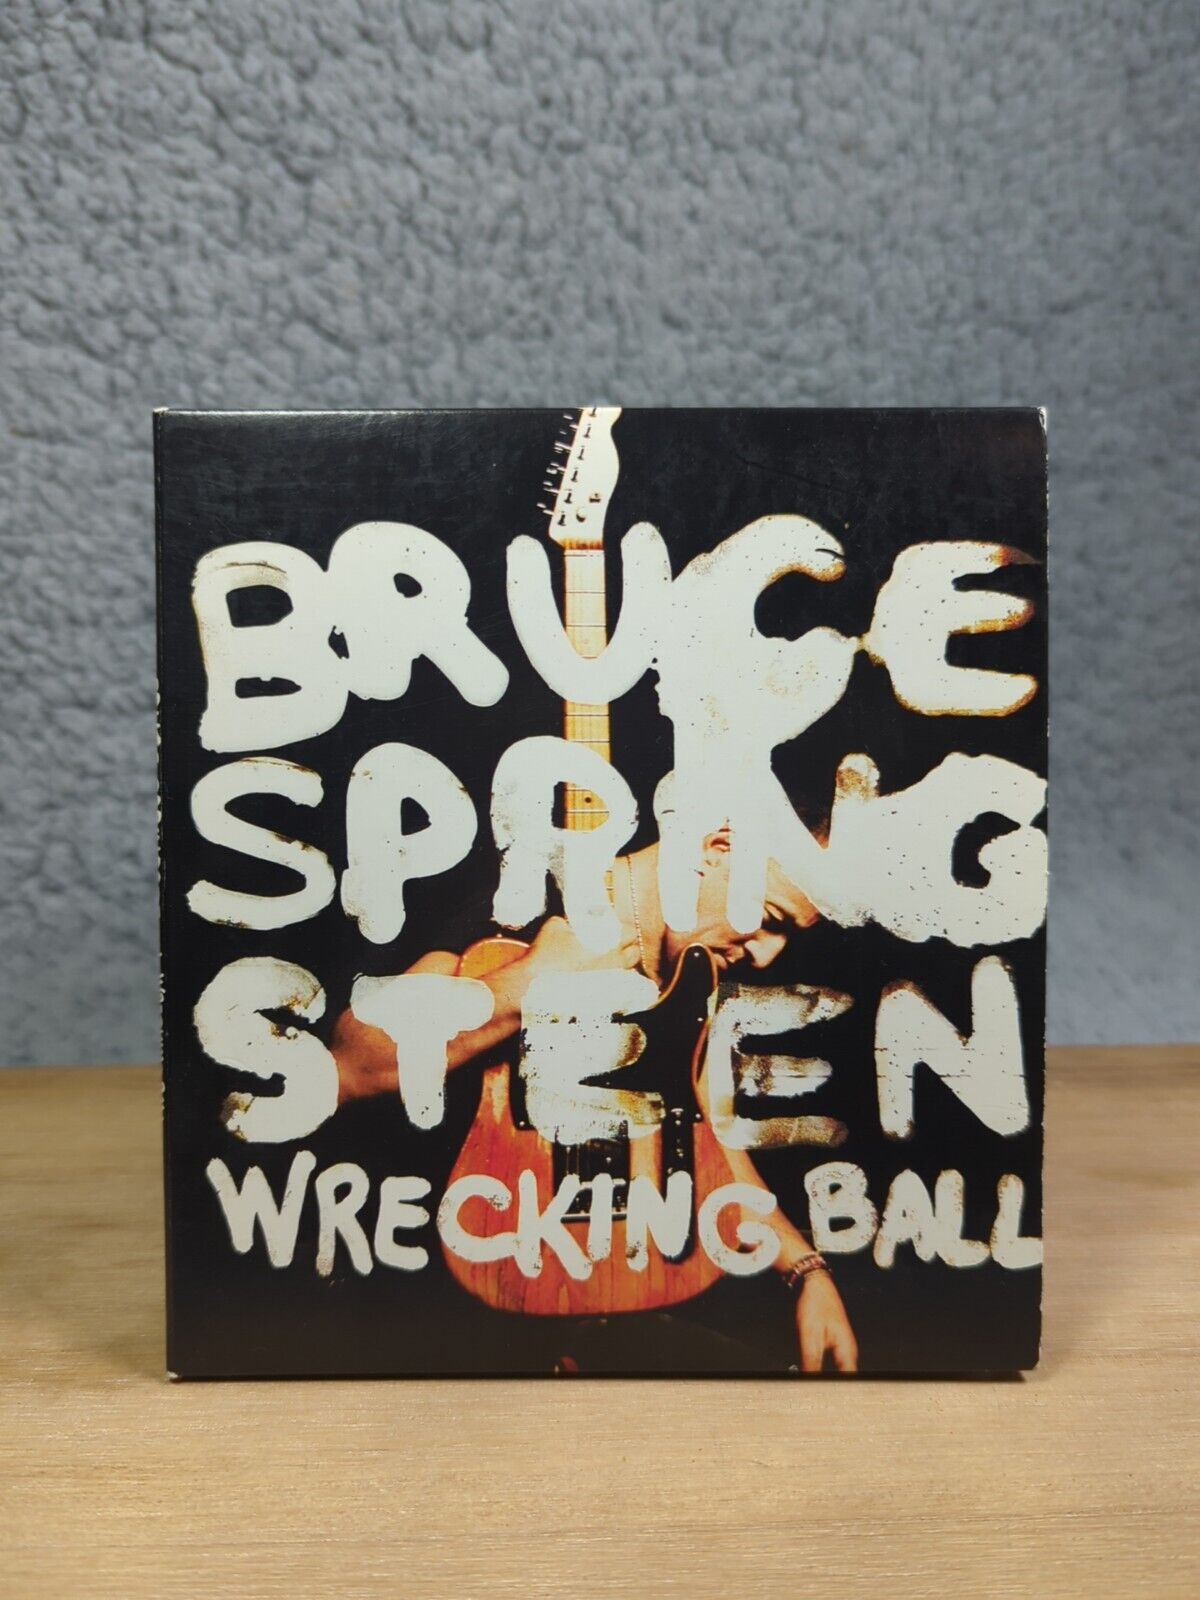 Wrecking Ball by Bruce Springsteen (CD, 2012)